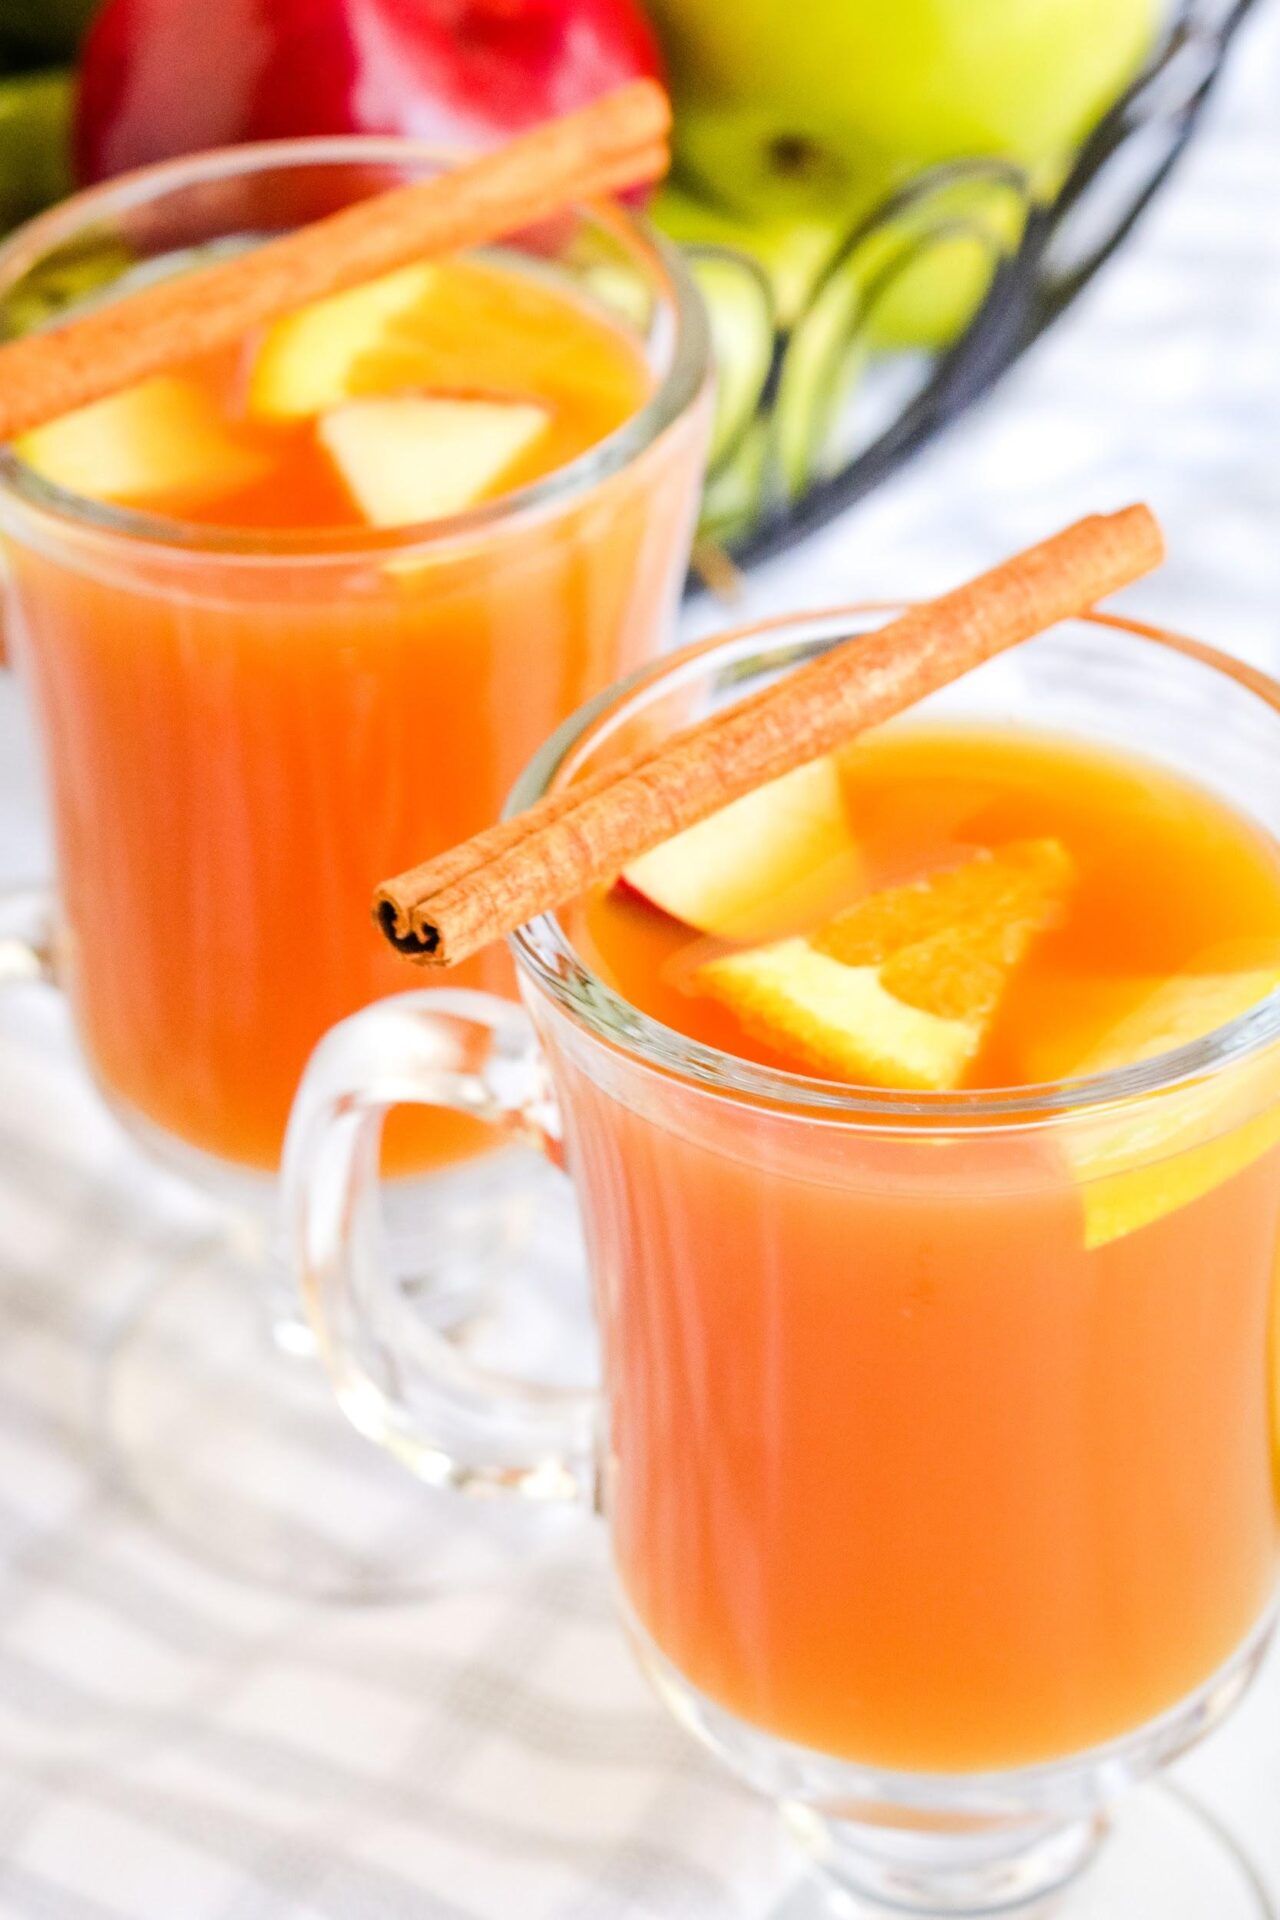 Are you looking for a super simple traditional Wassail or recipe or mulled cider? Well, look no further this recipe is delicious and simple that the whole family will enjoy!